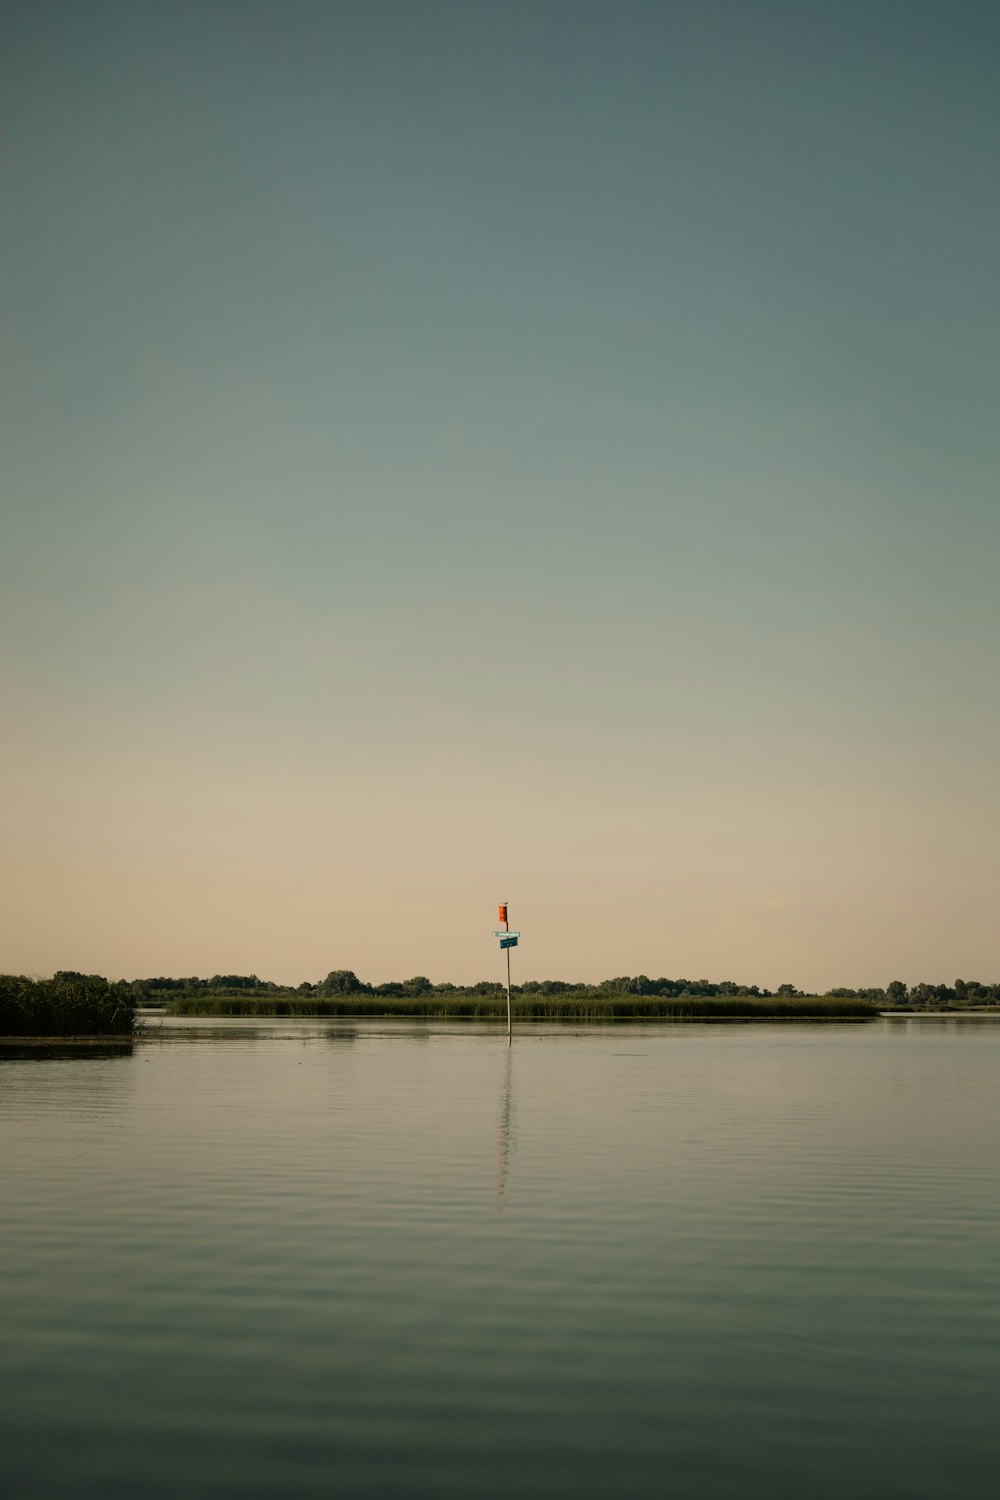 a body of water with a flag on a pole in the middle of it